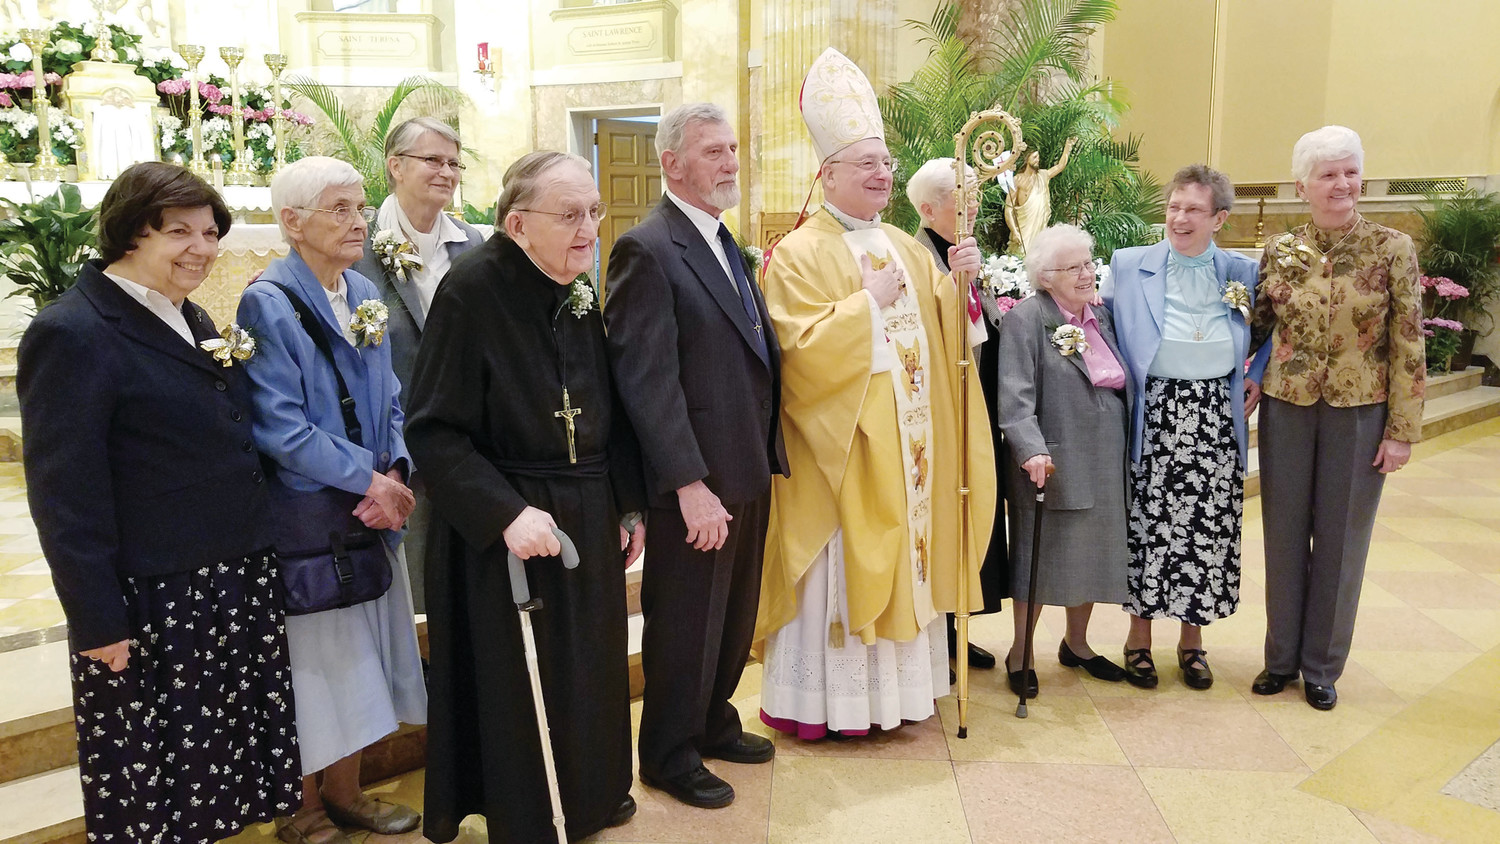 Auxiliary Bishop Robert C. Evans gathers for a photo with some of the jubilarians, including Brother Louis Laperle, who is wearing a black habit and holding a cane. The Brother of the Sacred Heart is celebrating 70 years of profession.